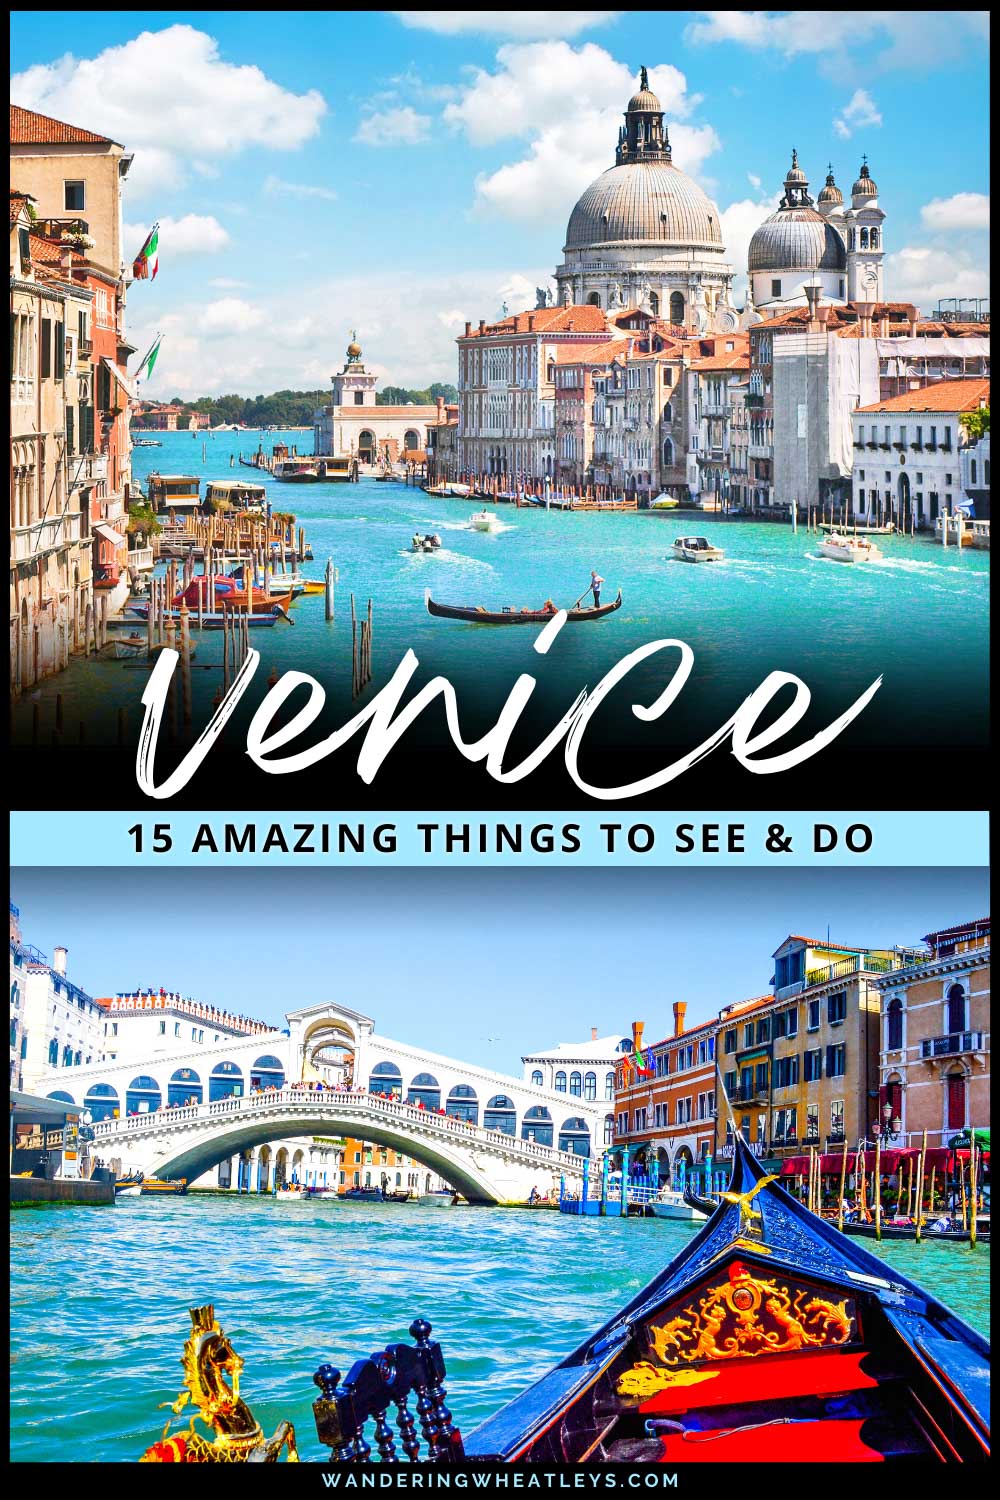 The Best Things to do in Venice, Italy